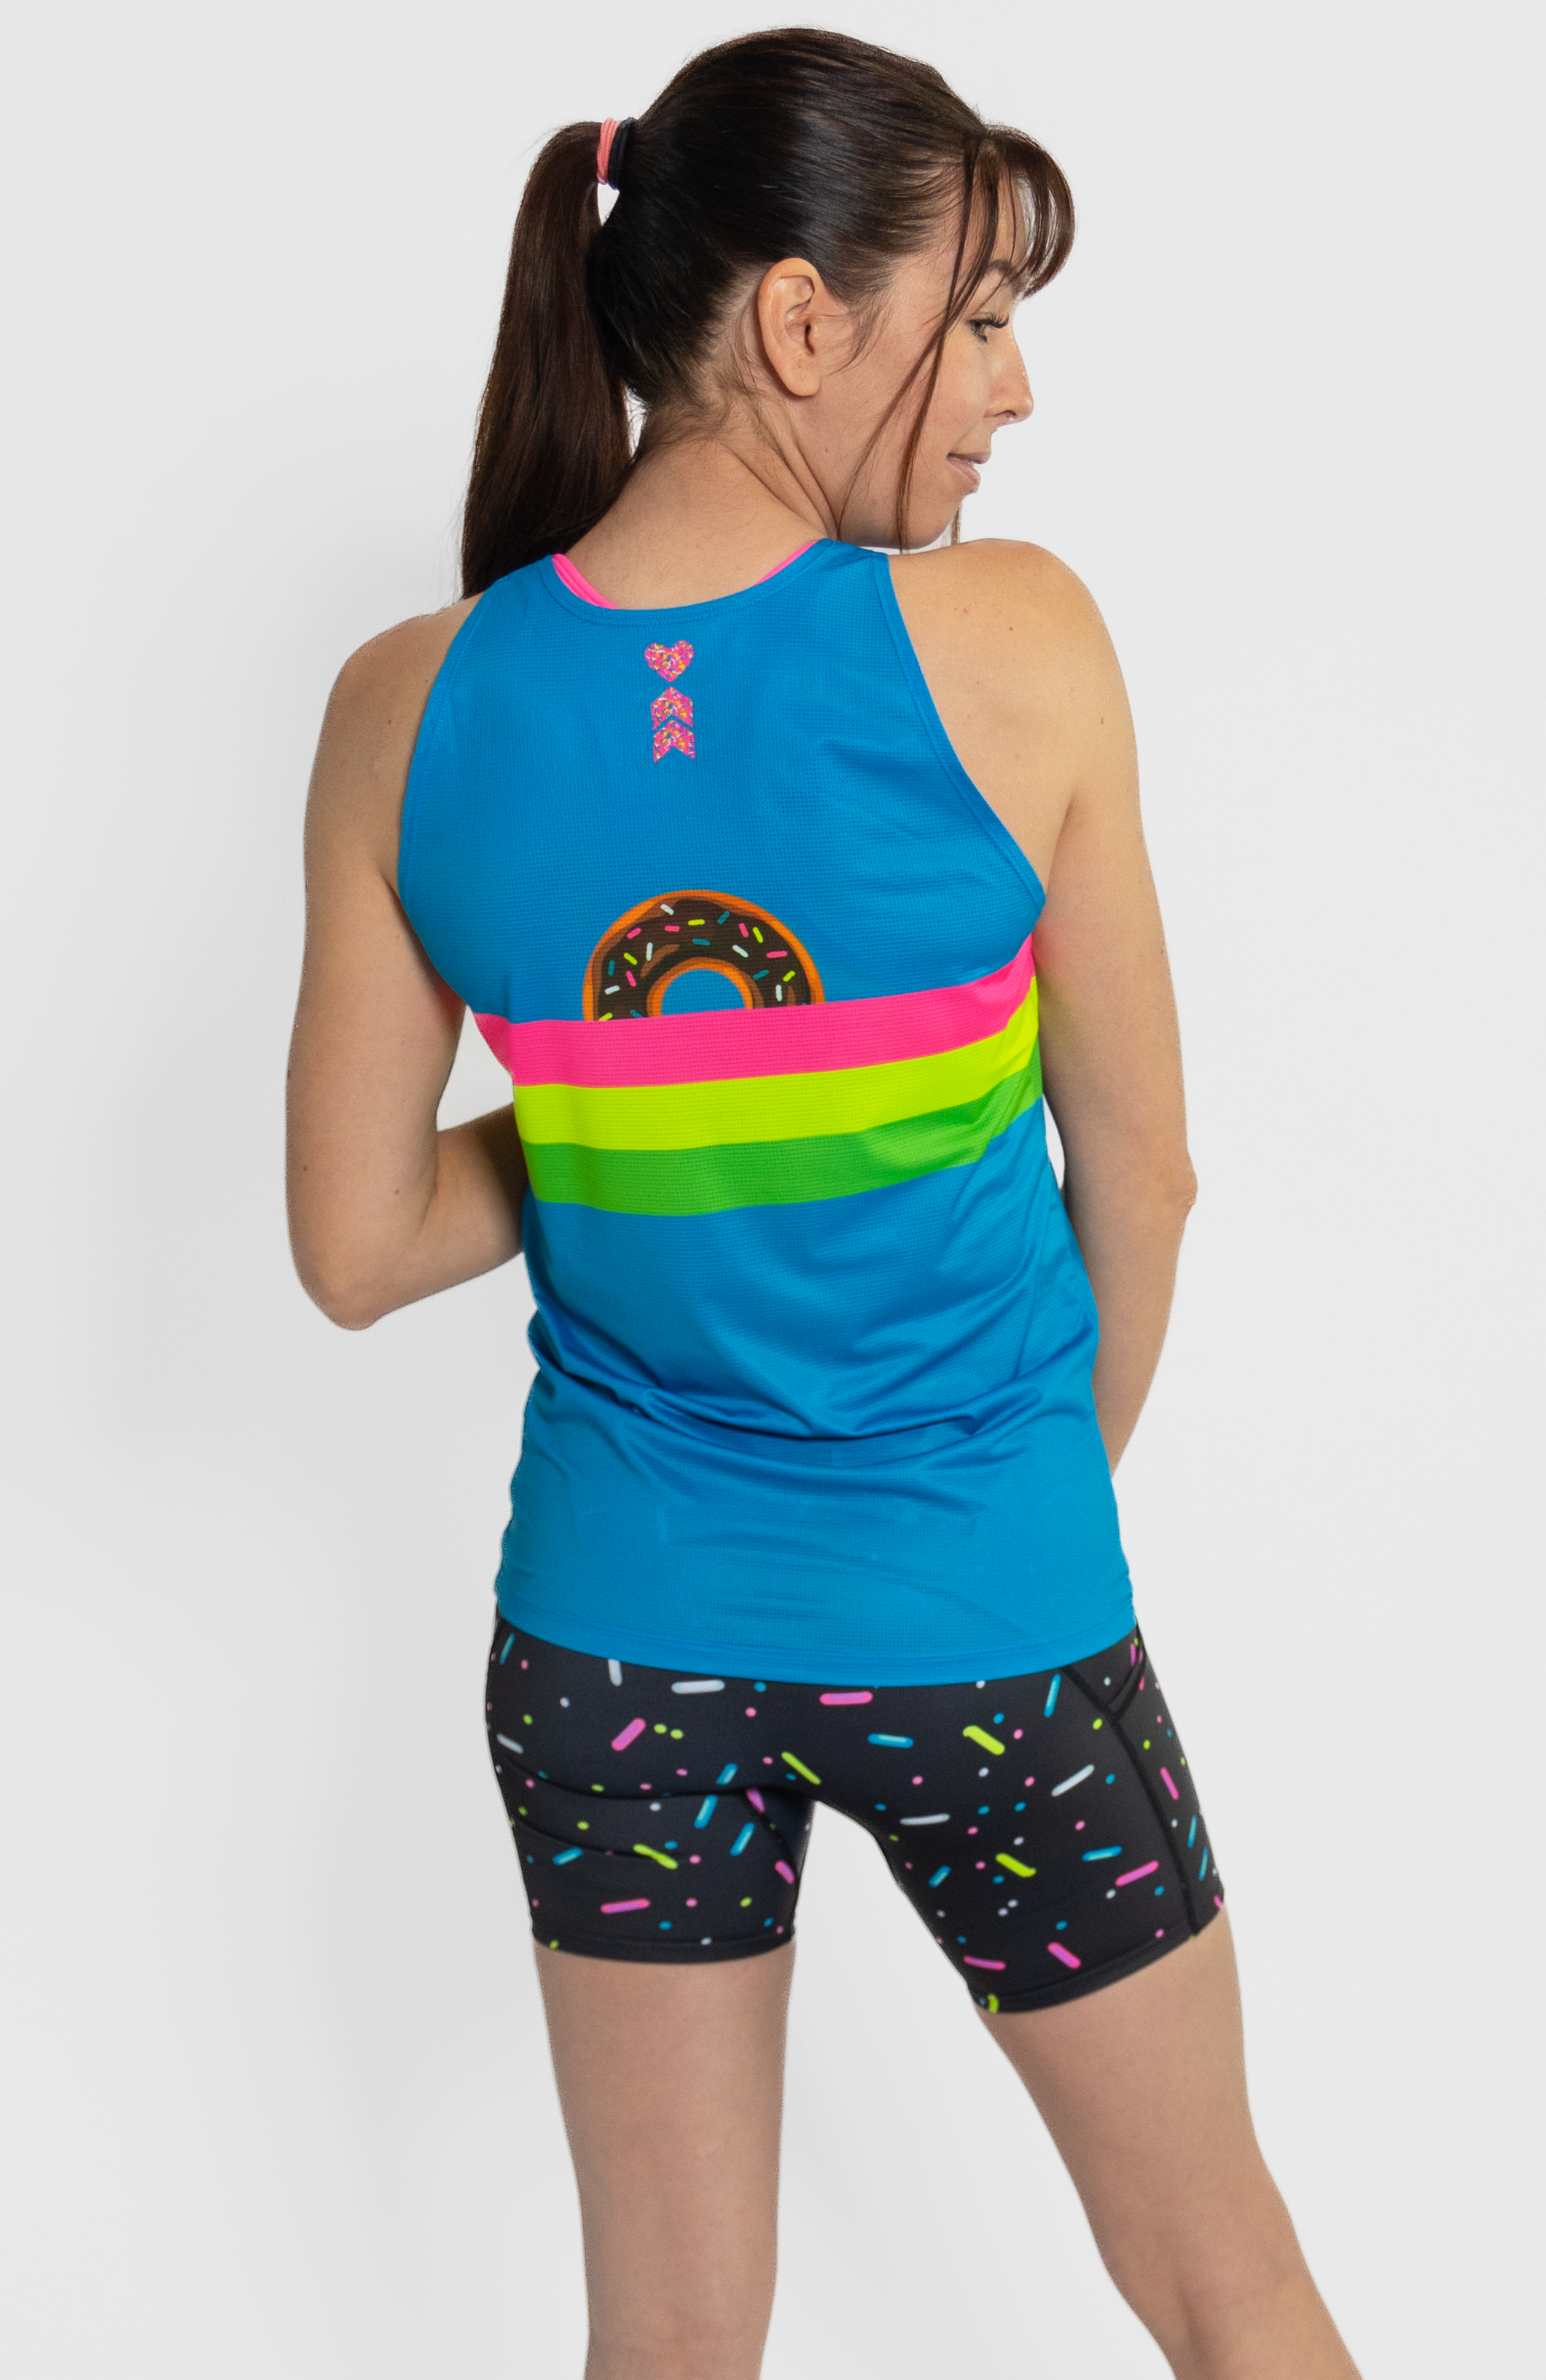 Women's Running Shorts, Tops and Tights – Coeur Sports